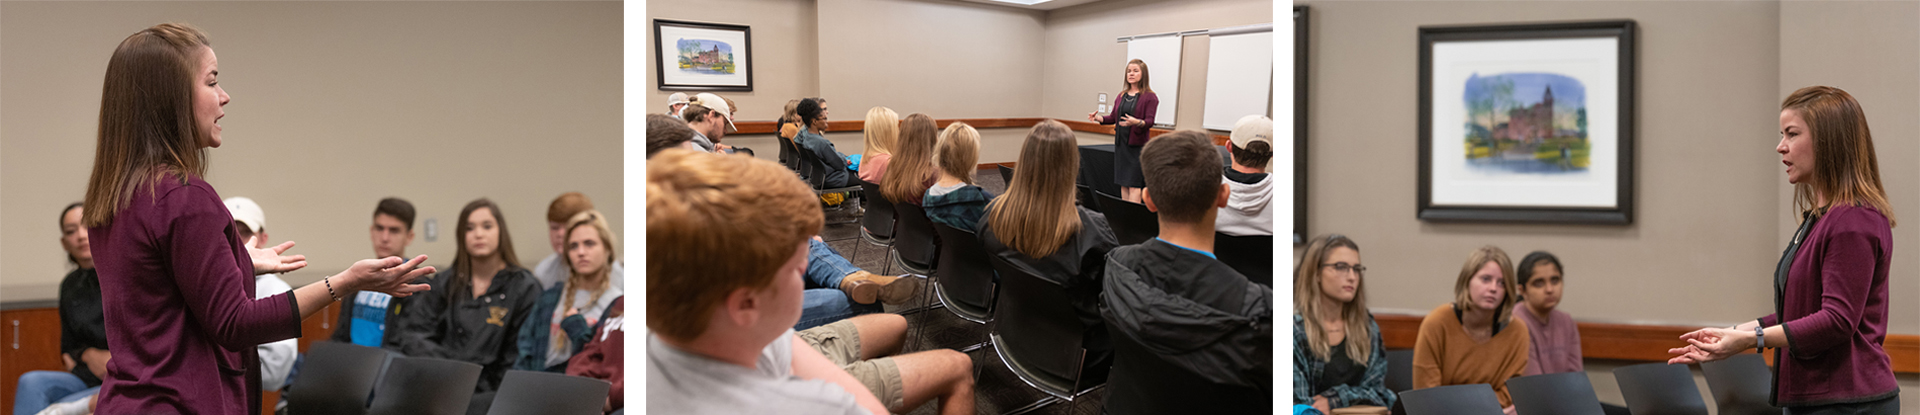 mary tipton woolley speaks to high school students